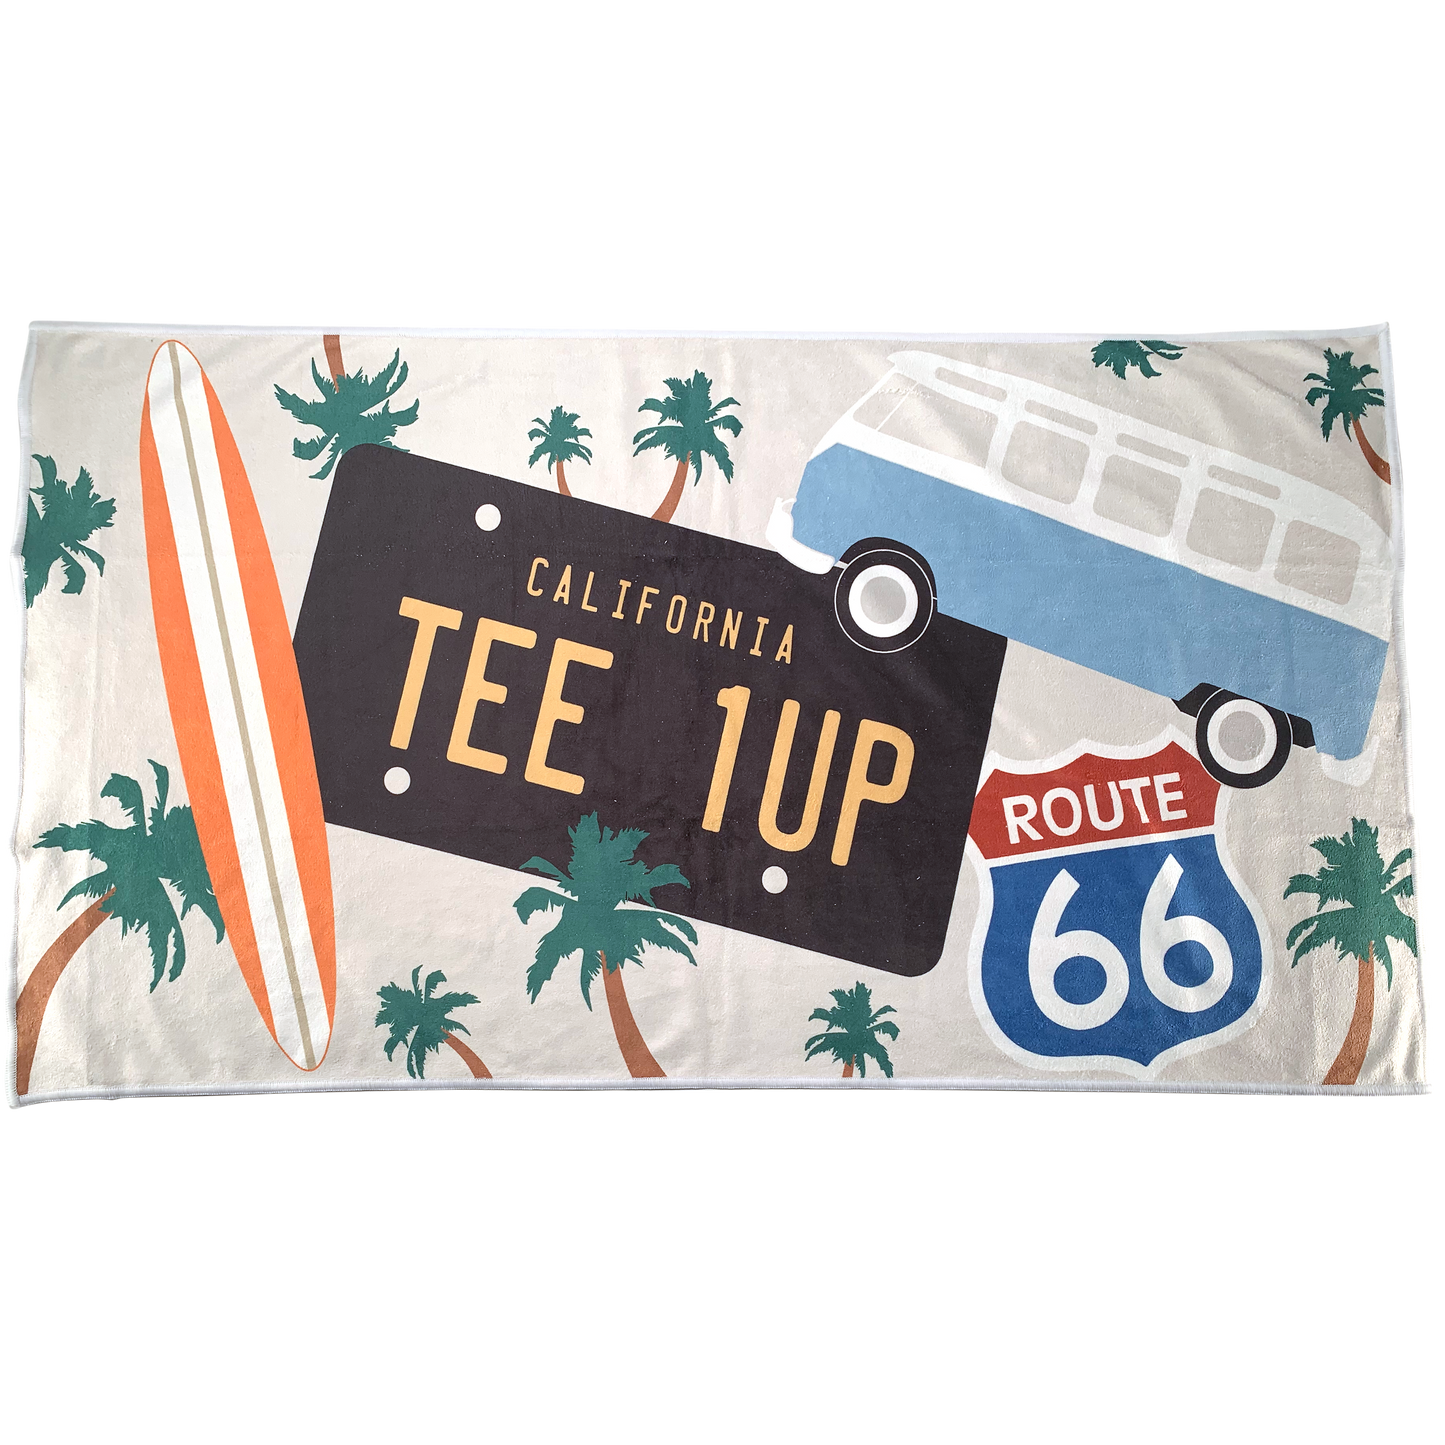 New California "Route 66" Player's Towel